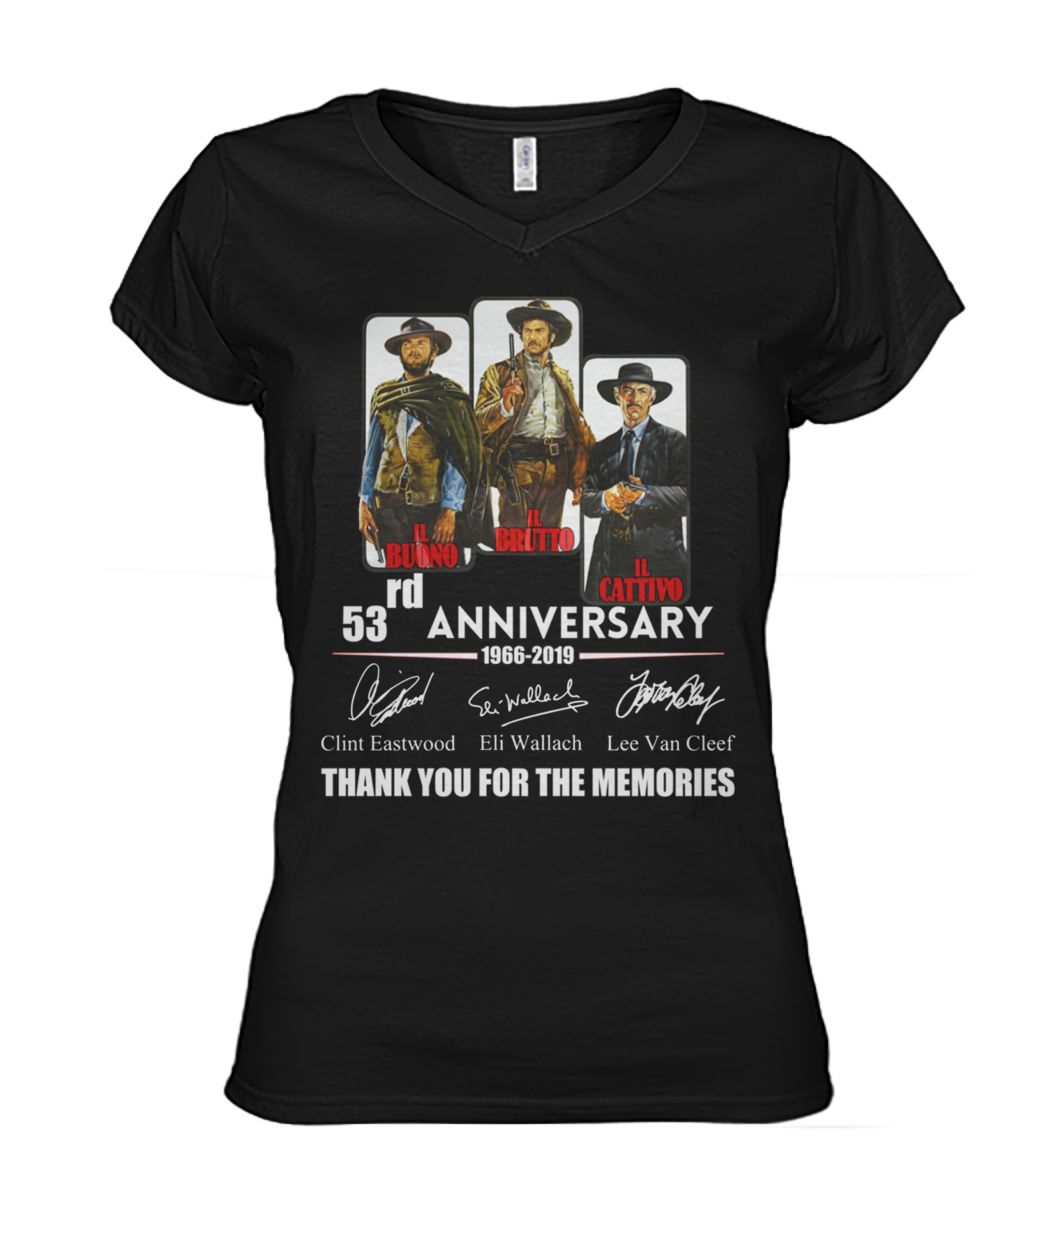 The good the bad and the ugly 53rd anniversary 1966 2019 women's v-neck